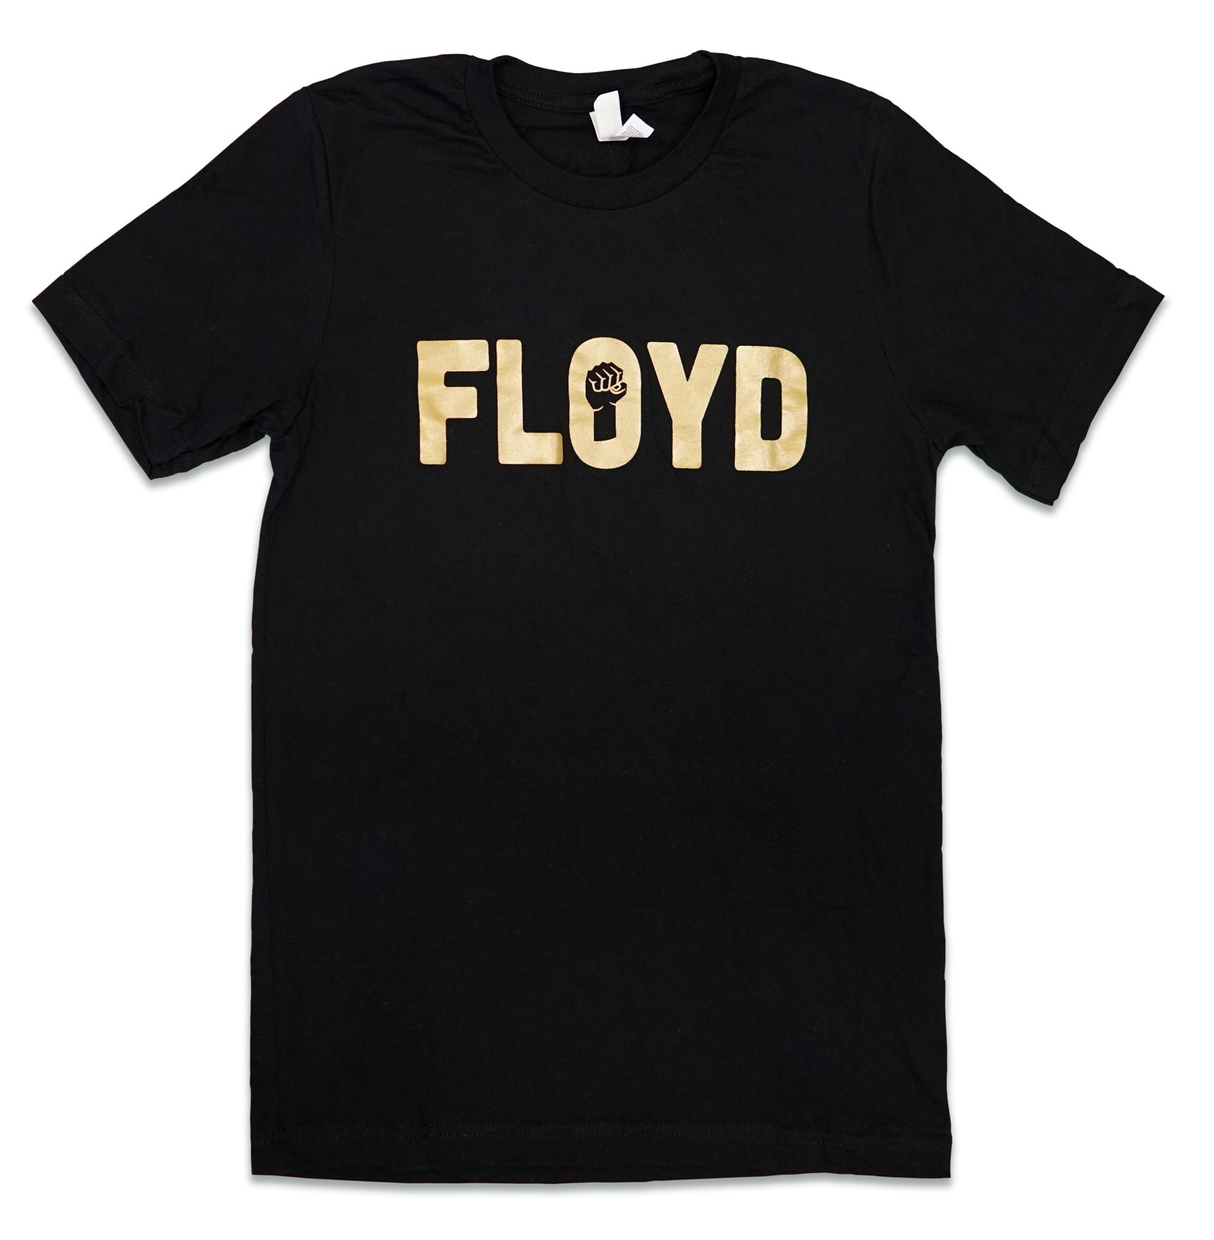 A black t-shirt with large, gold printed text spelling "FLOYD." The center of the "O" is a raised fist.